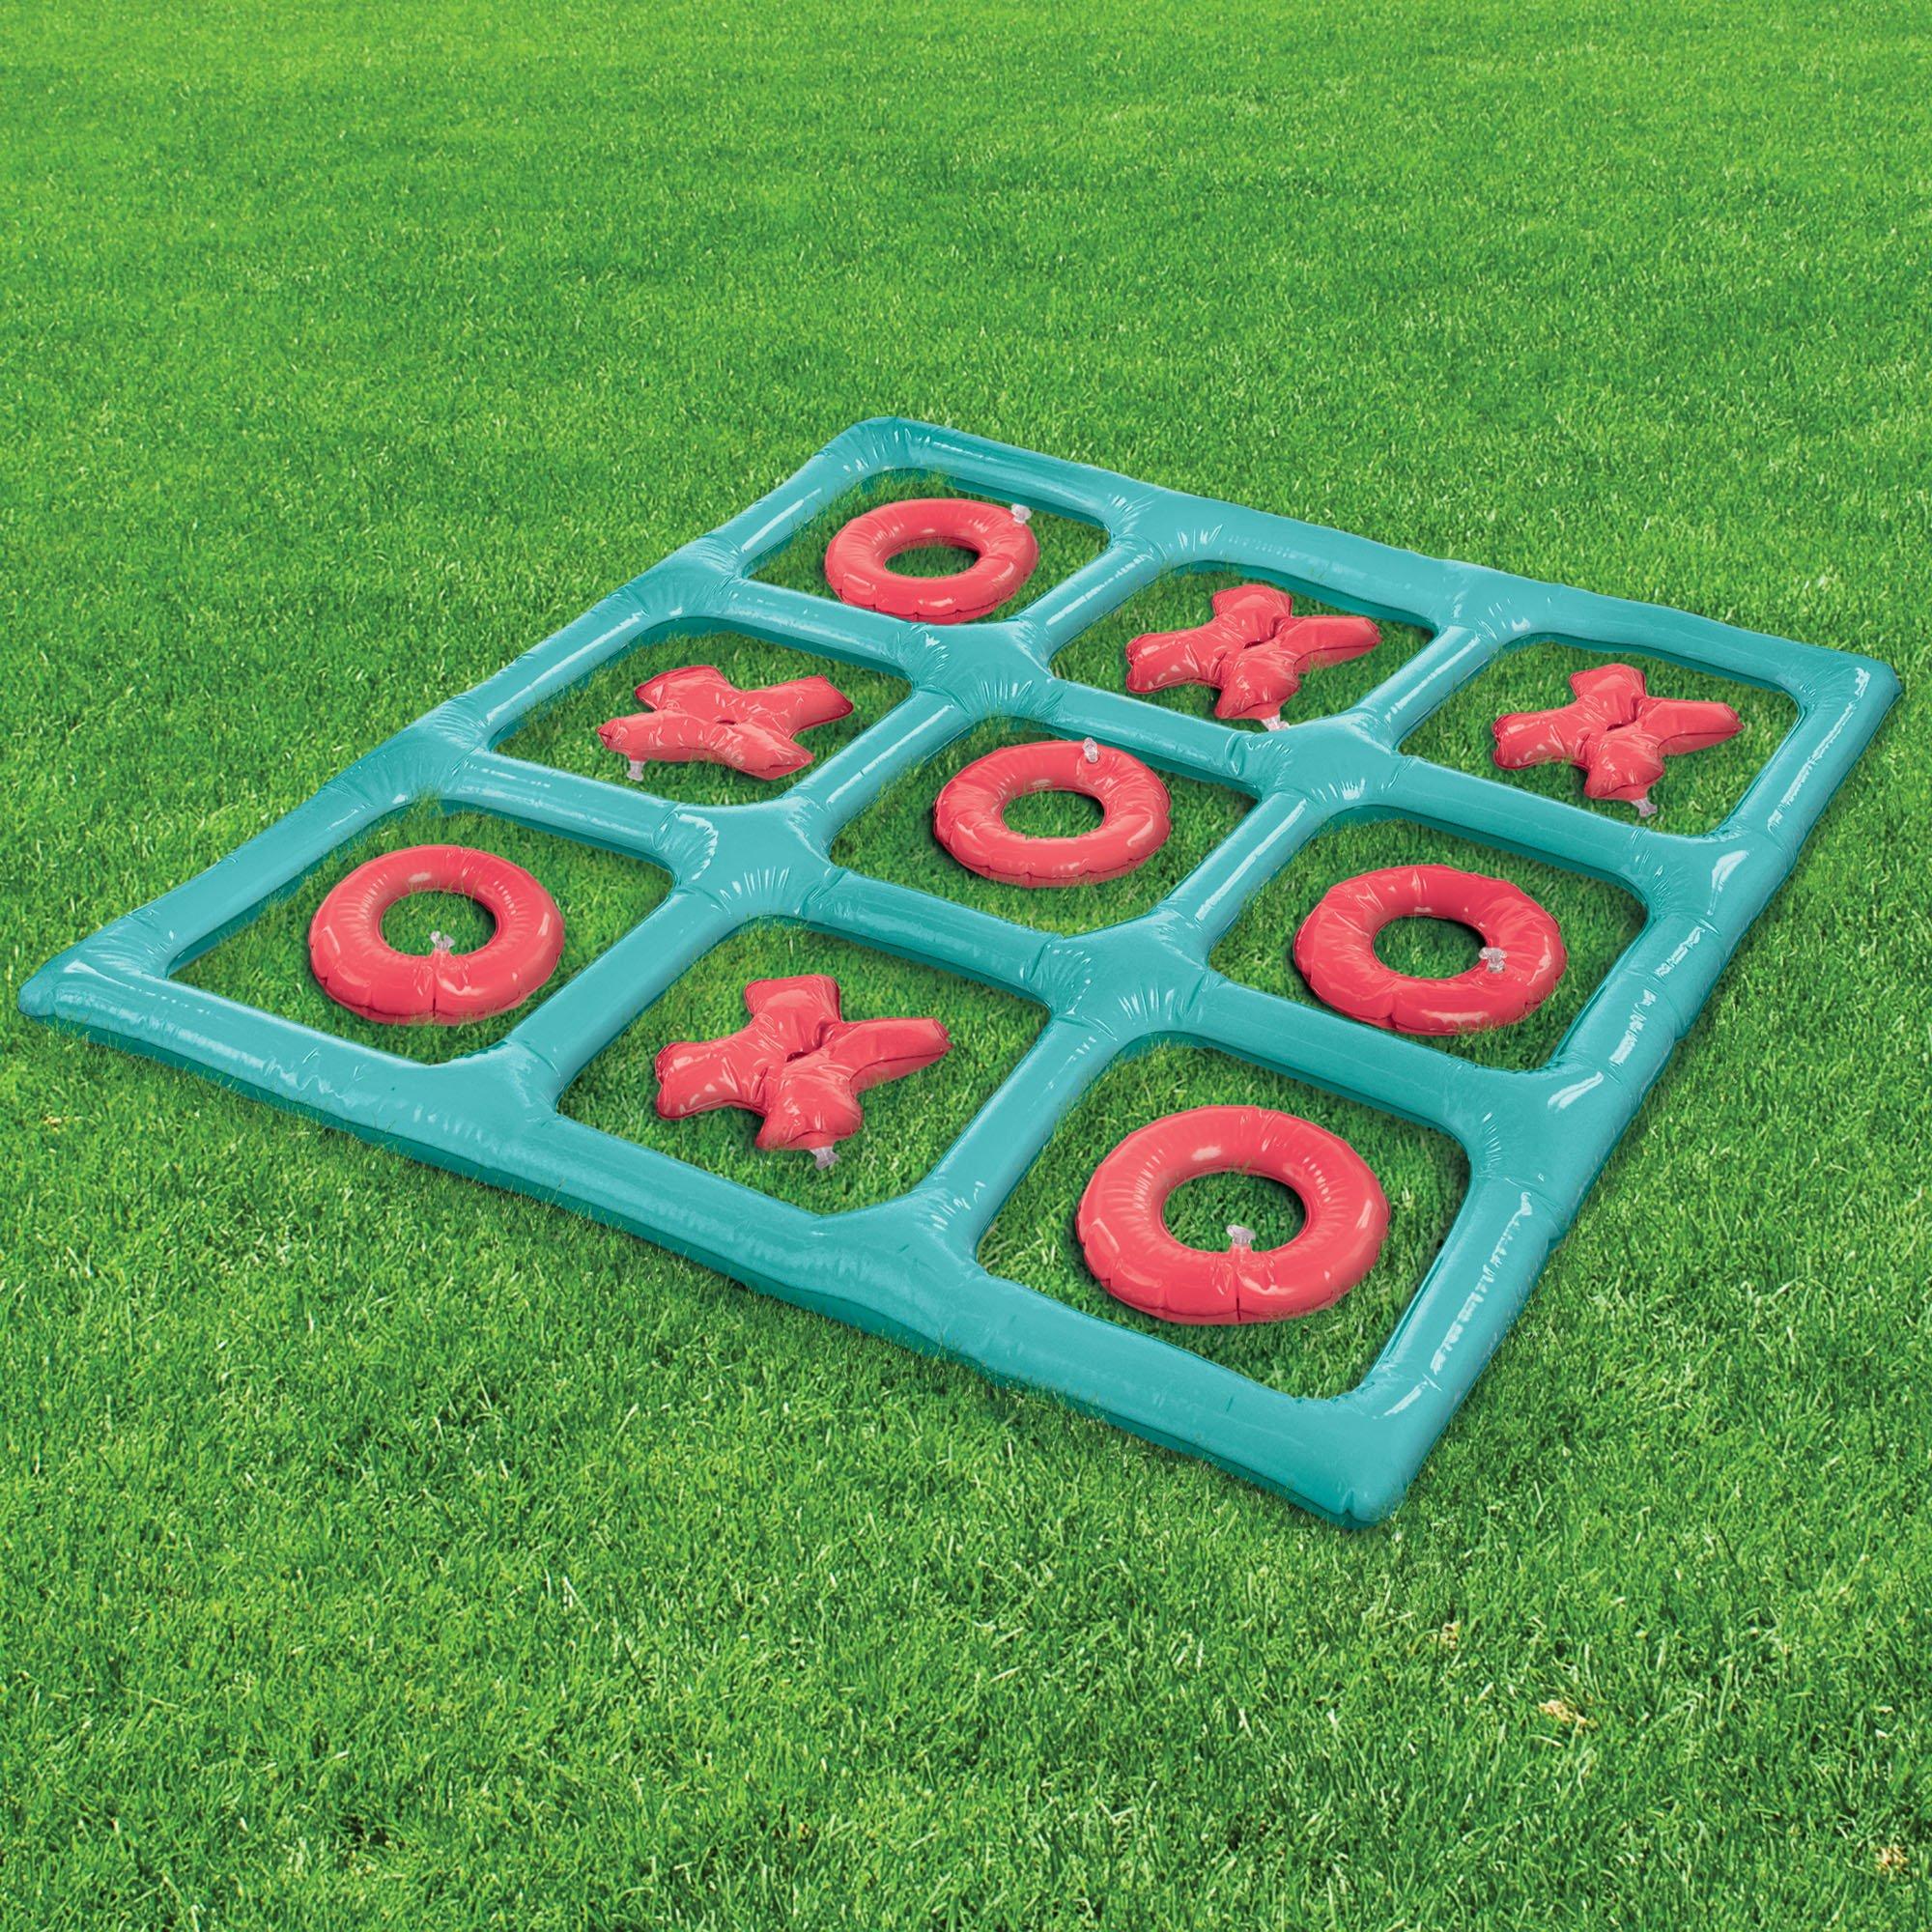 FOOTBALL TIC-TAC-TOE  10+ BOARDS TO PLAY 